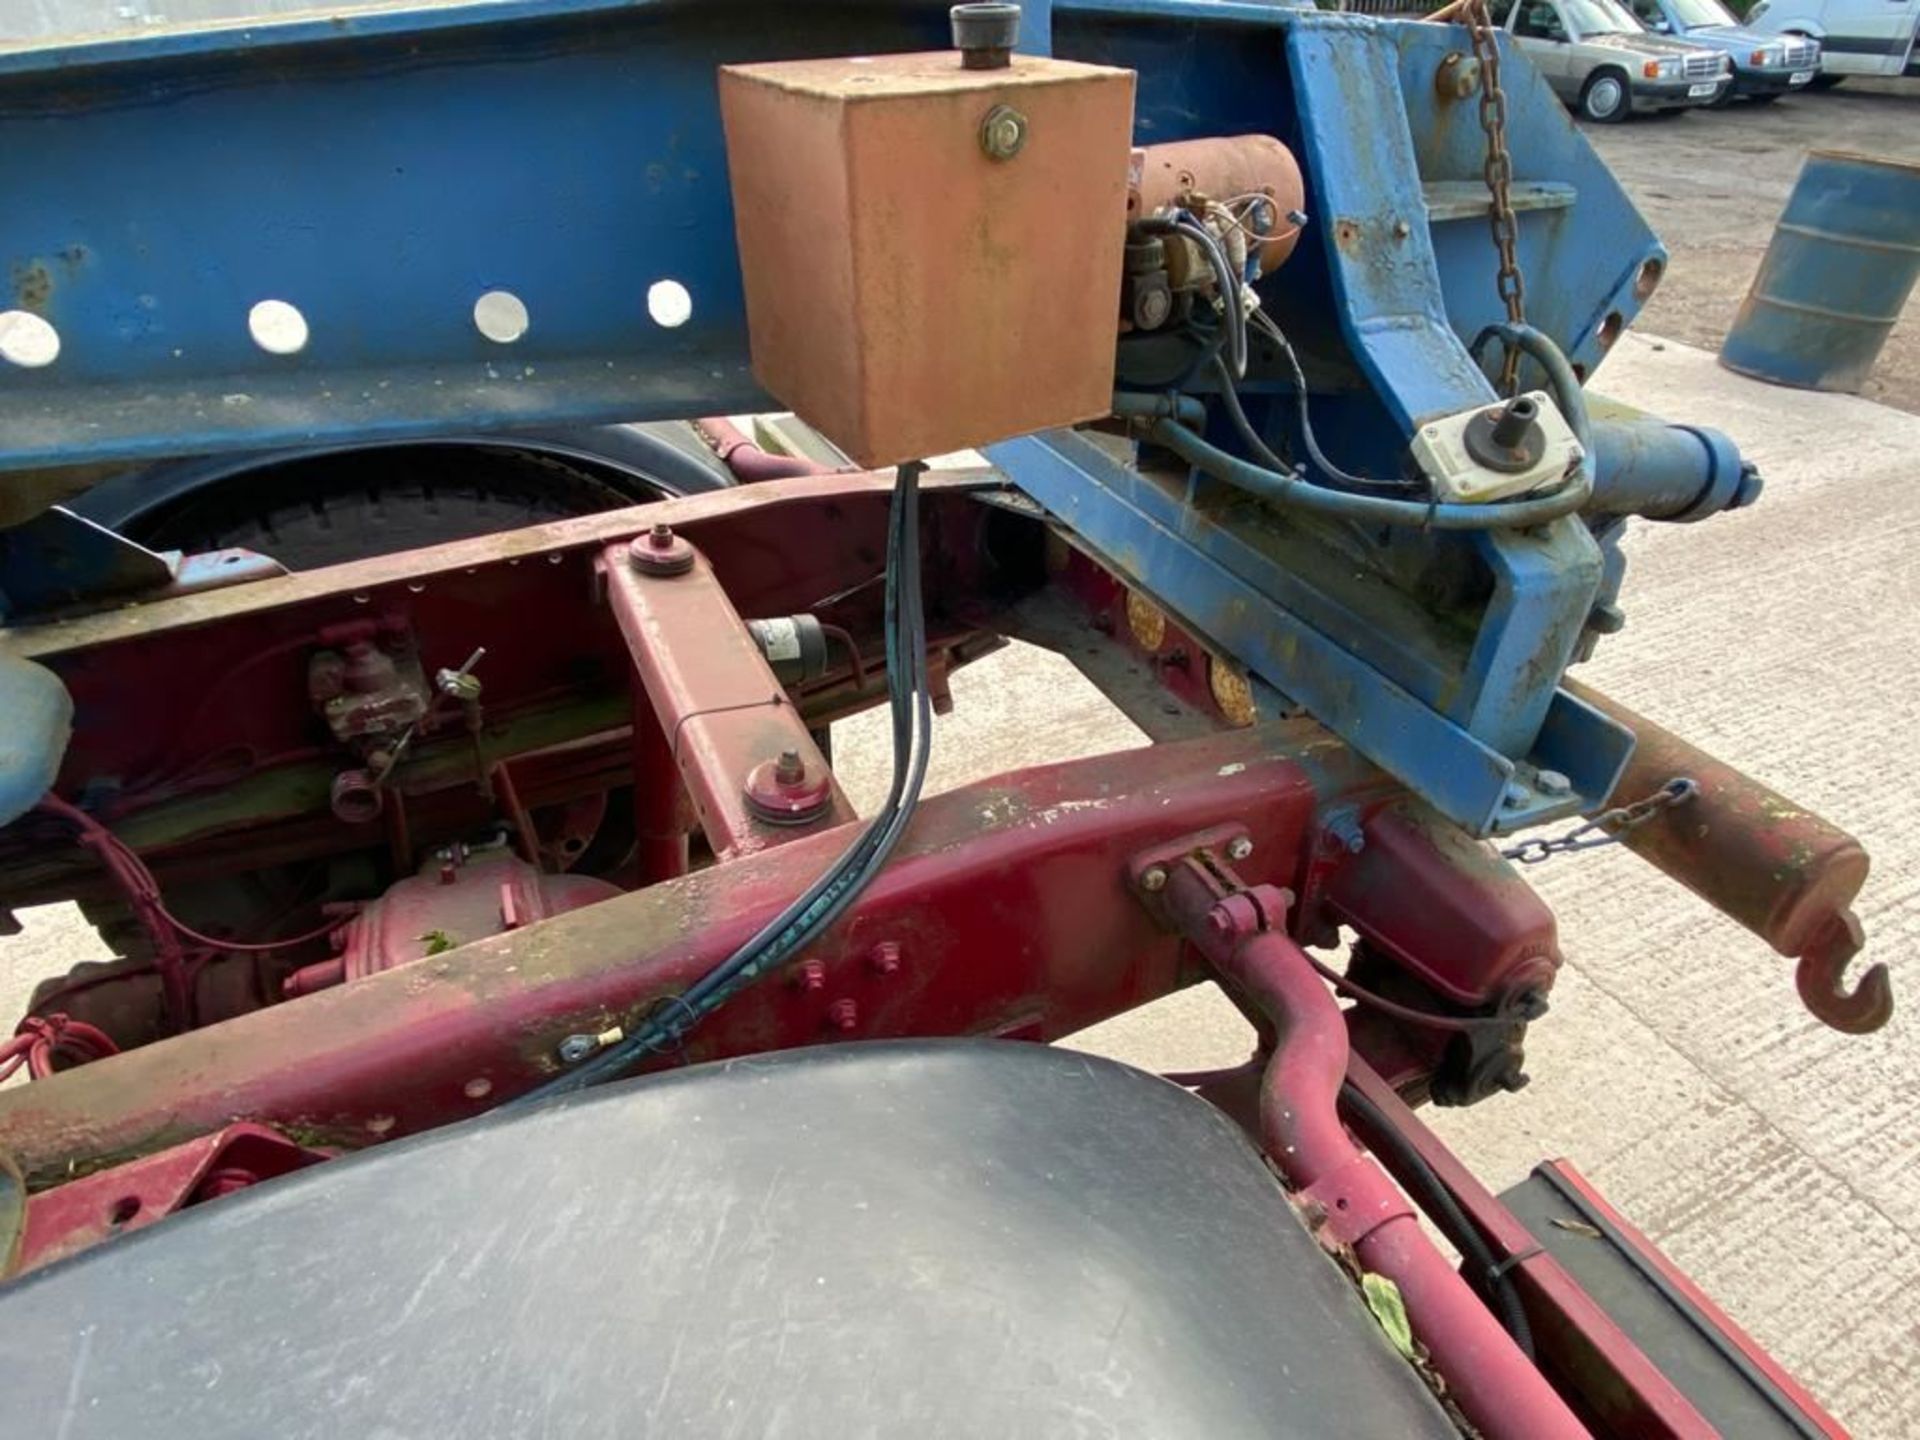 5th Wheel Recovery Equipment - Image 14 of 28